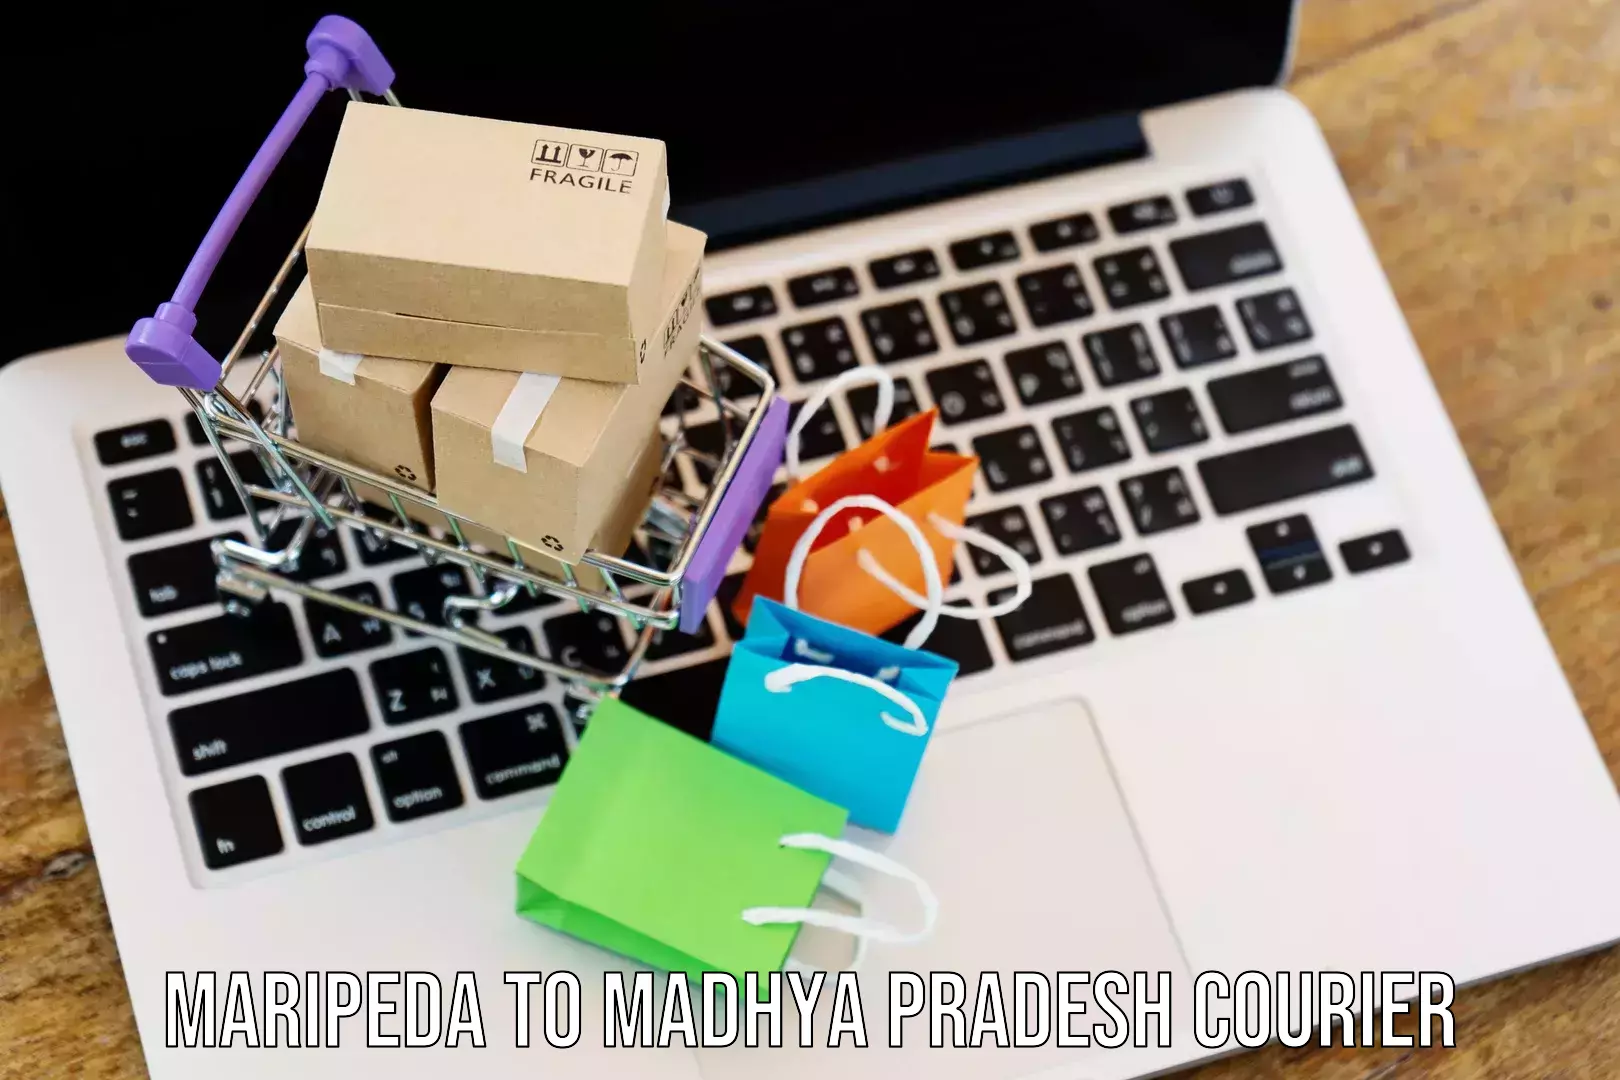 Express delivery network Maripeda to IIIT Bhopal